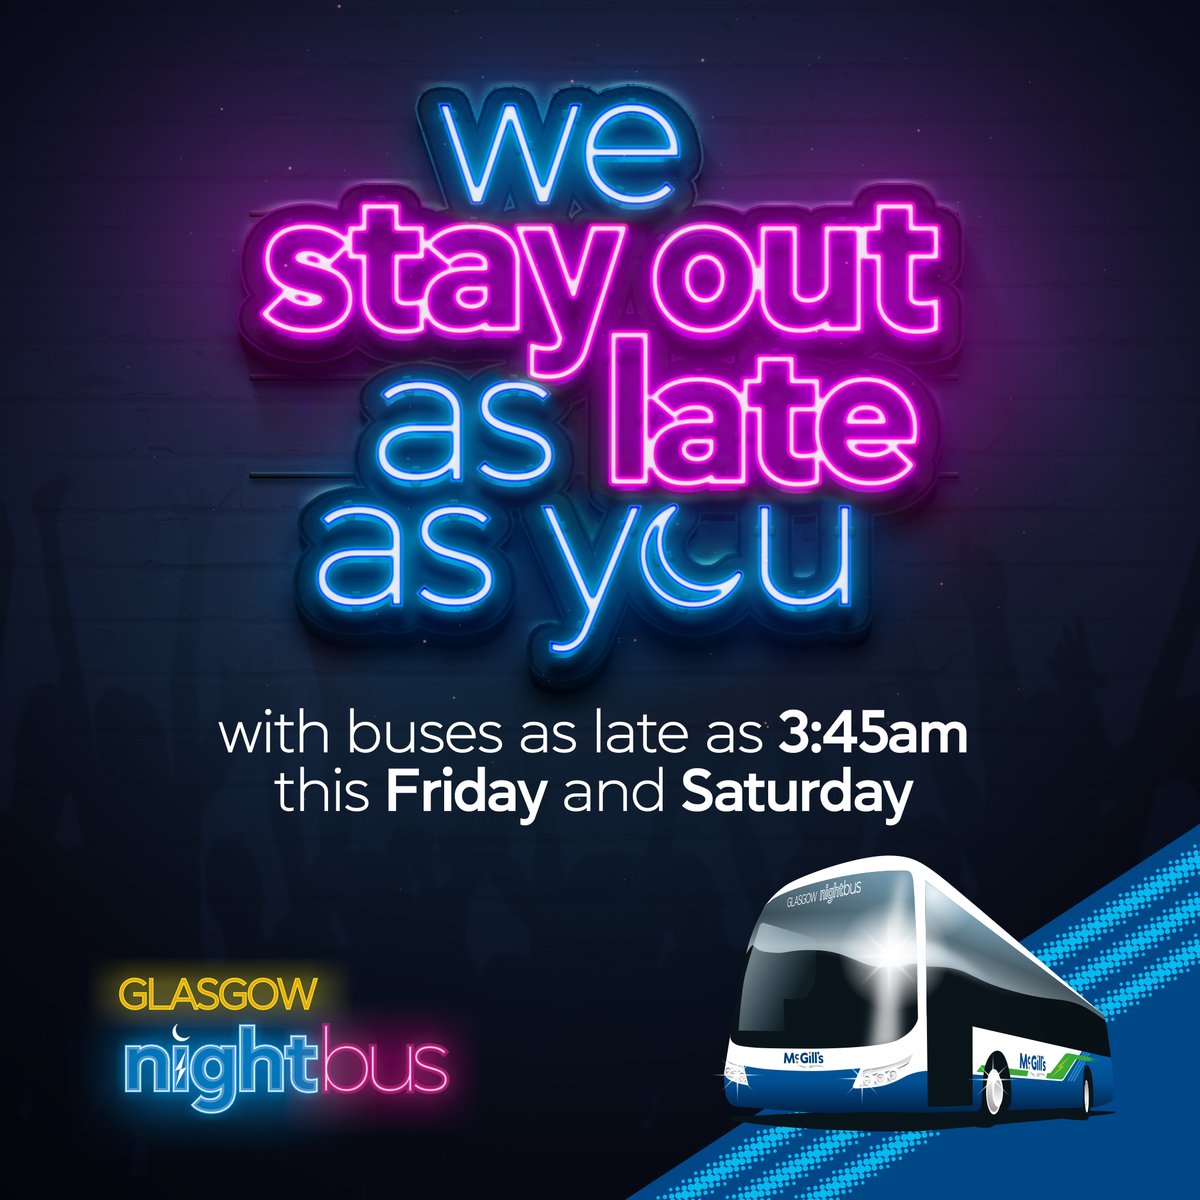 Happy Friday 🎉 Our nightbus is back out in Glasgow this weekend 🚌🌙 No more late-night stress about getting home - we've got you covered 🙌 Grab a NightSaver for £7.20 and enjoy unlimited rides after 6pm 💃 Find out more ➡️ mcgillsbuses.co.uk/nightbus